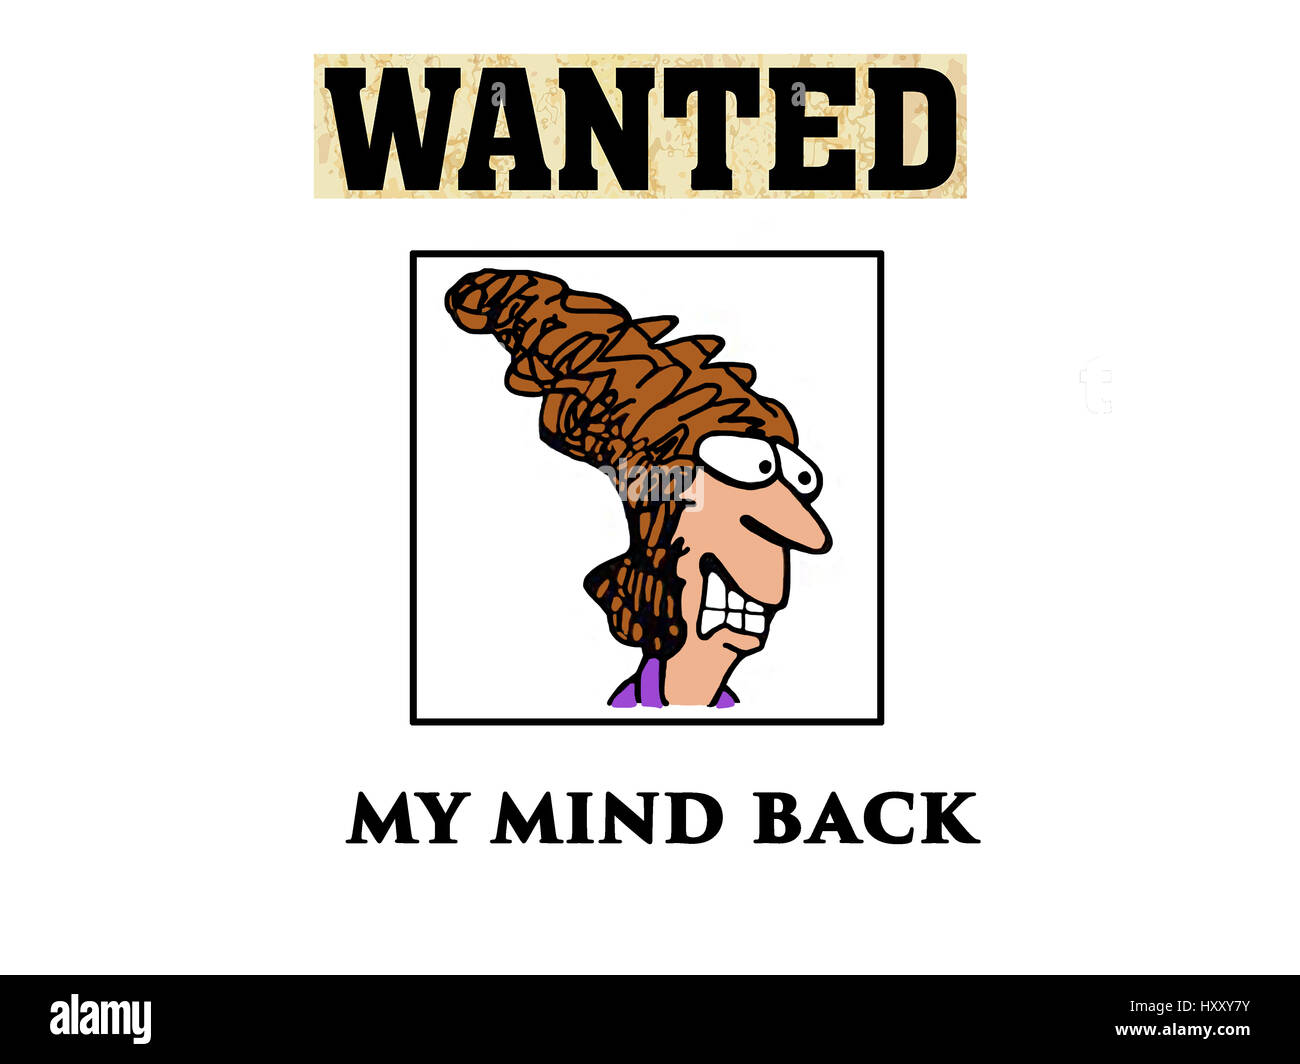 Cartoon illustration showing a stressed woman who wants her mind back. Stock Photo